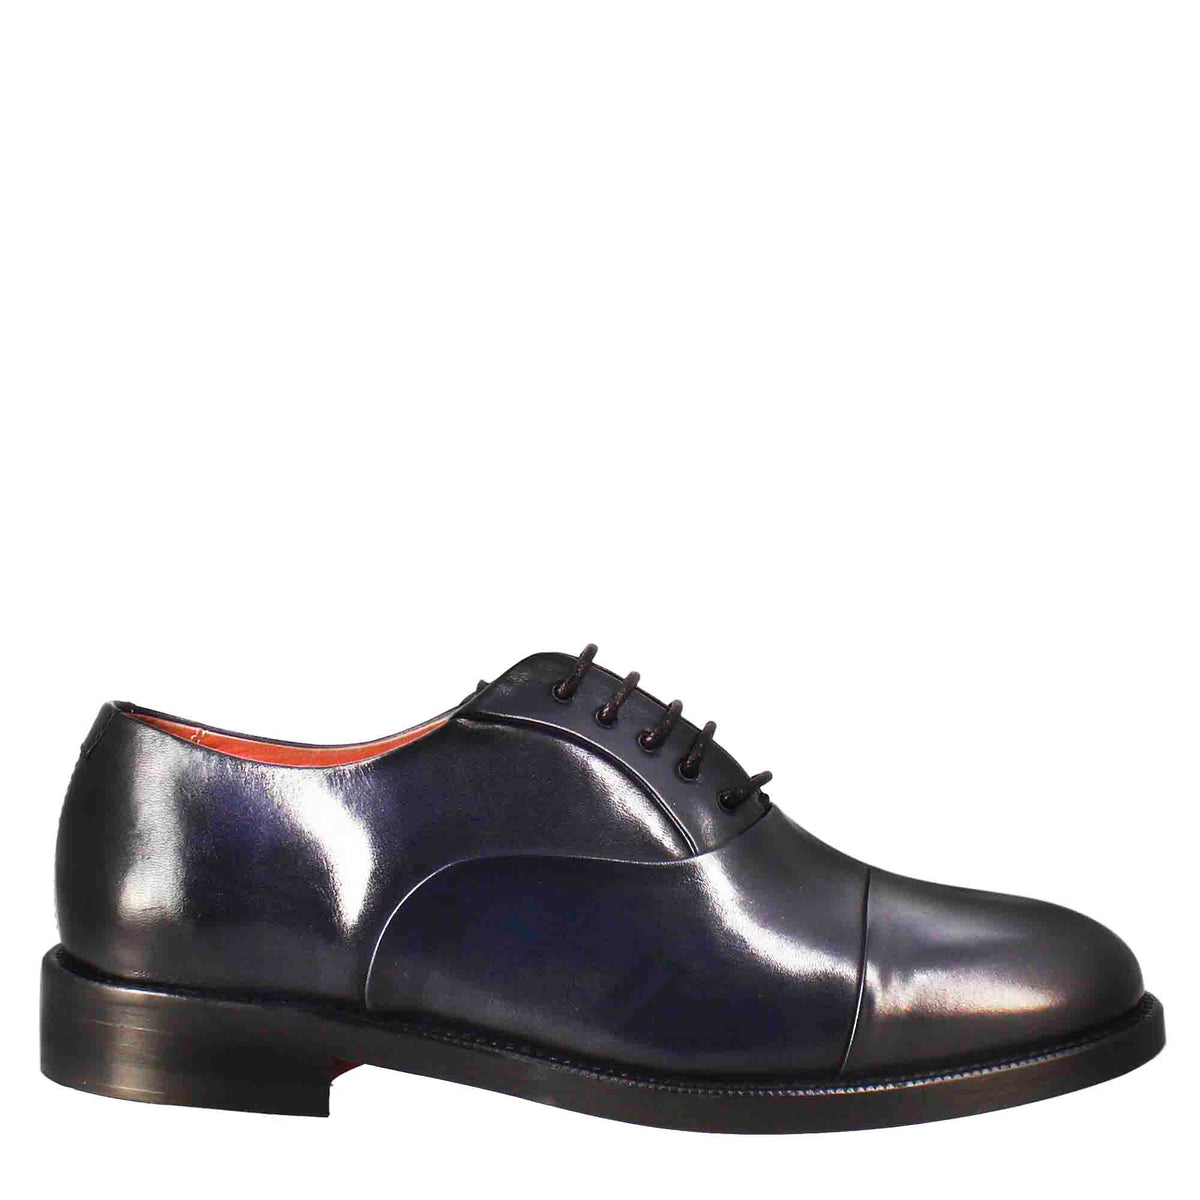 Women's oxfords with stitching on the toe in blue leather